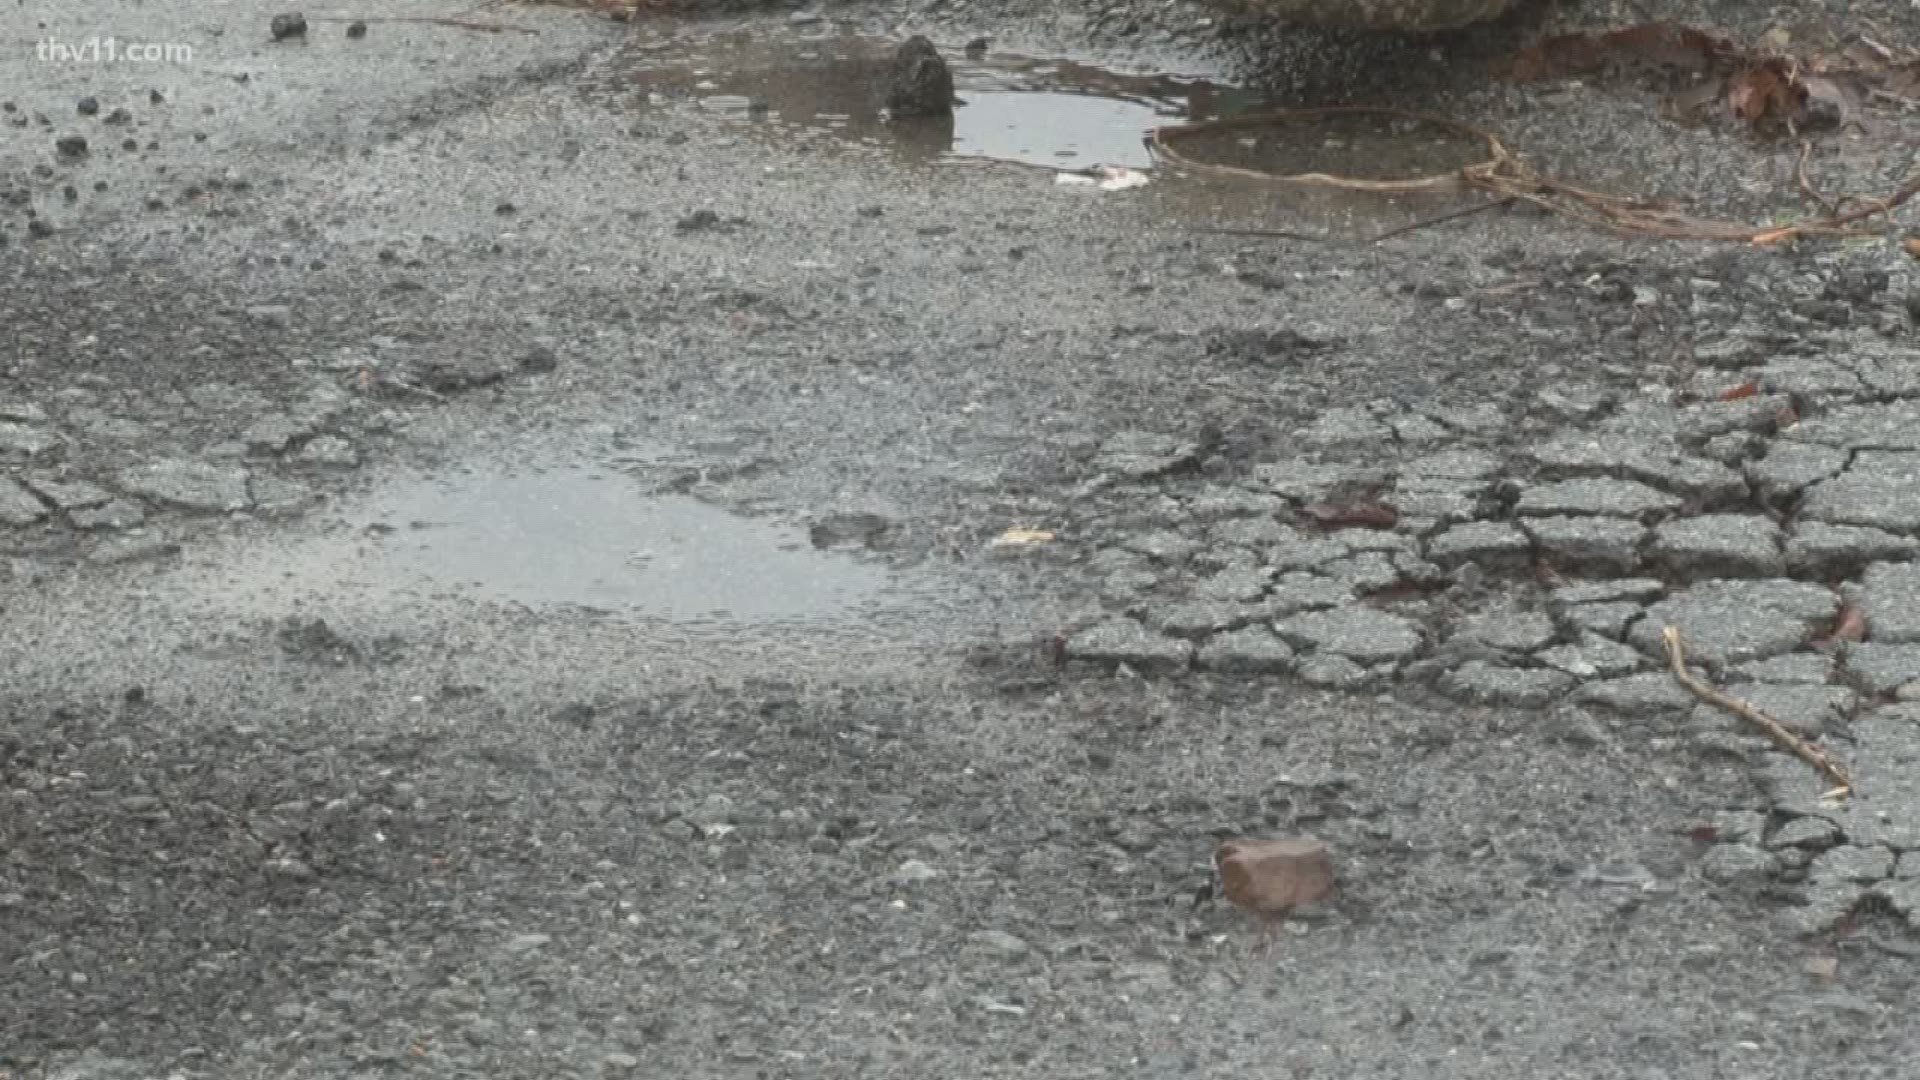 Heavy rains moving through central Arkansas are leaving behind messy road conditions.